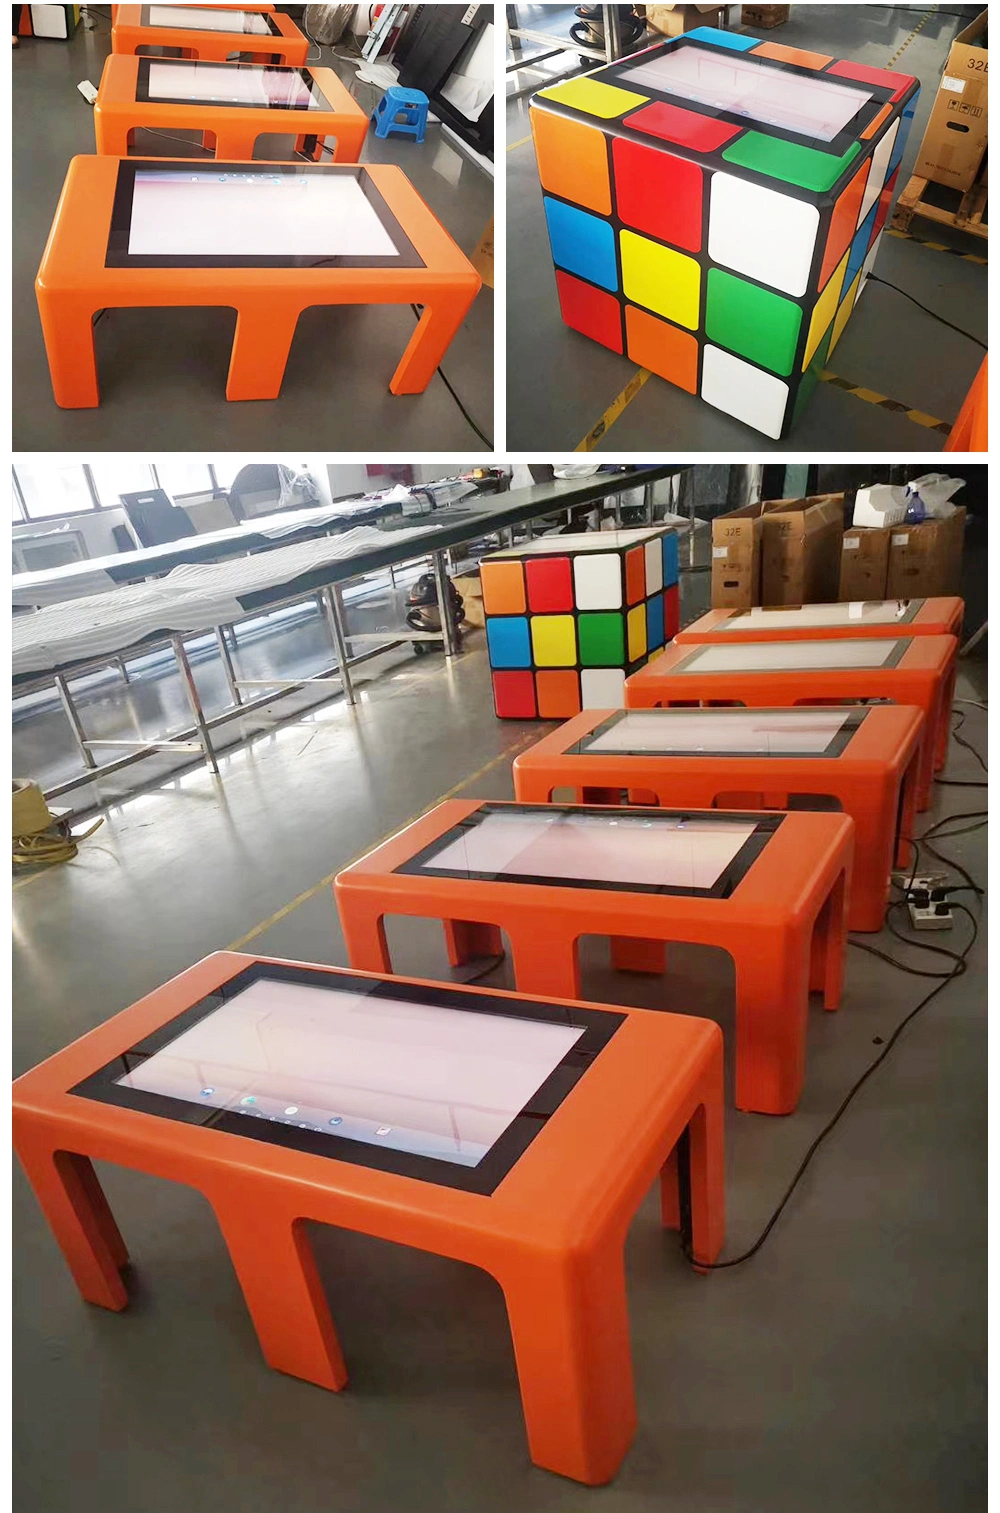 Intelligent Customized Designed 43inch White Interactive Touch Tea Table with Templered Glass Panel